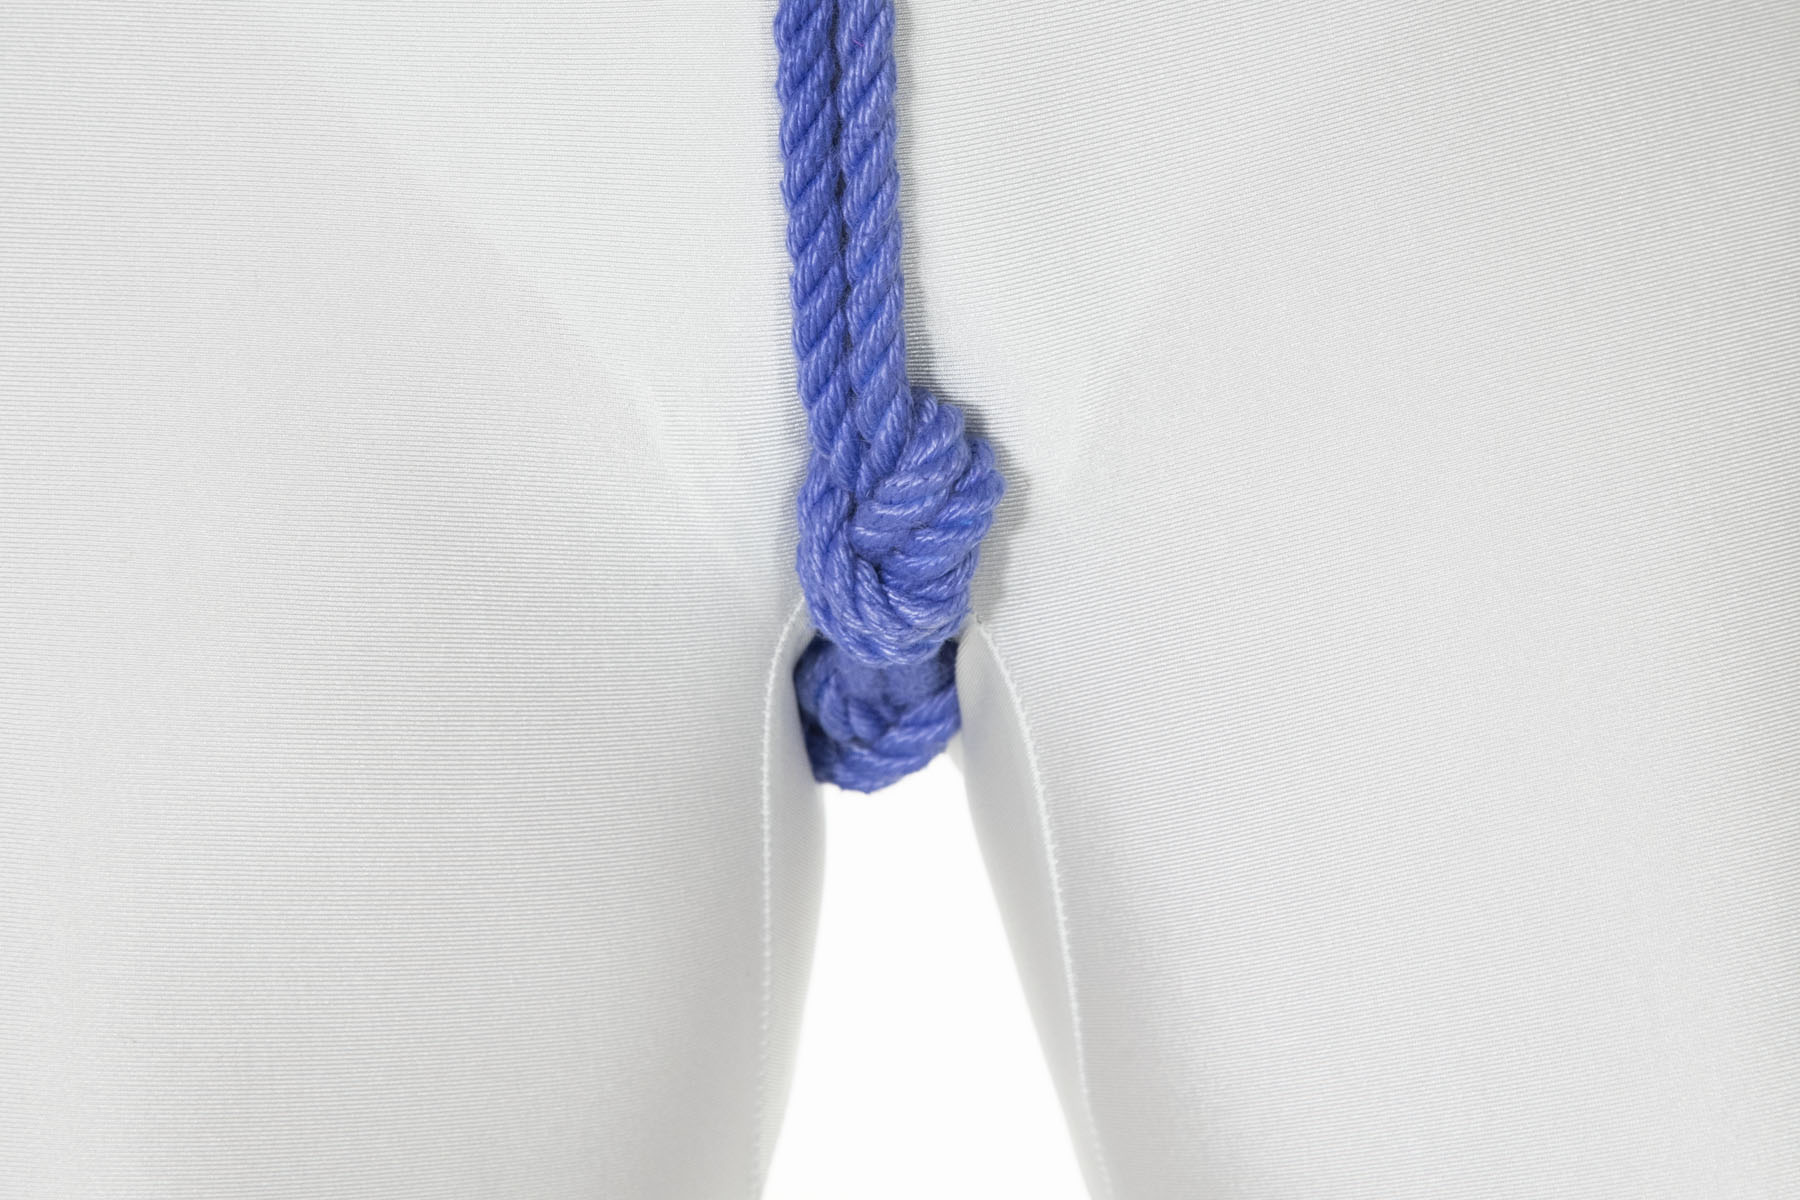 A closeup of the rope as it passes between the legs and goes over the crotch. Several overhand knots have been tied in the rope to create pressure points over the genitals.